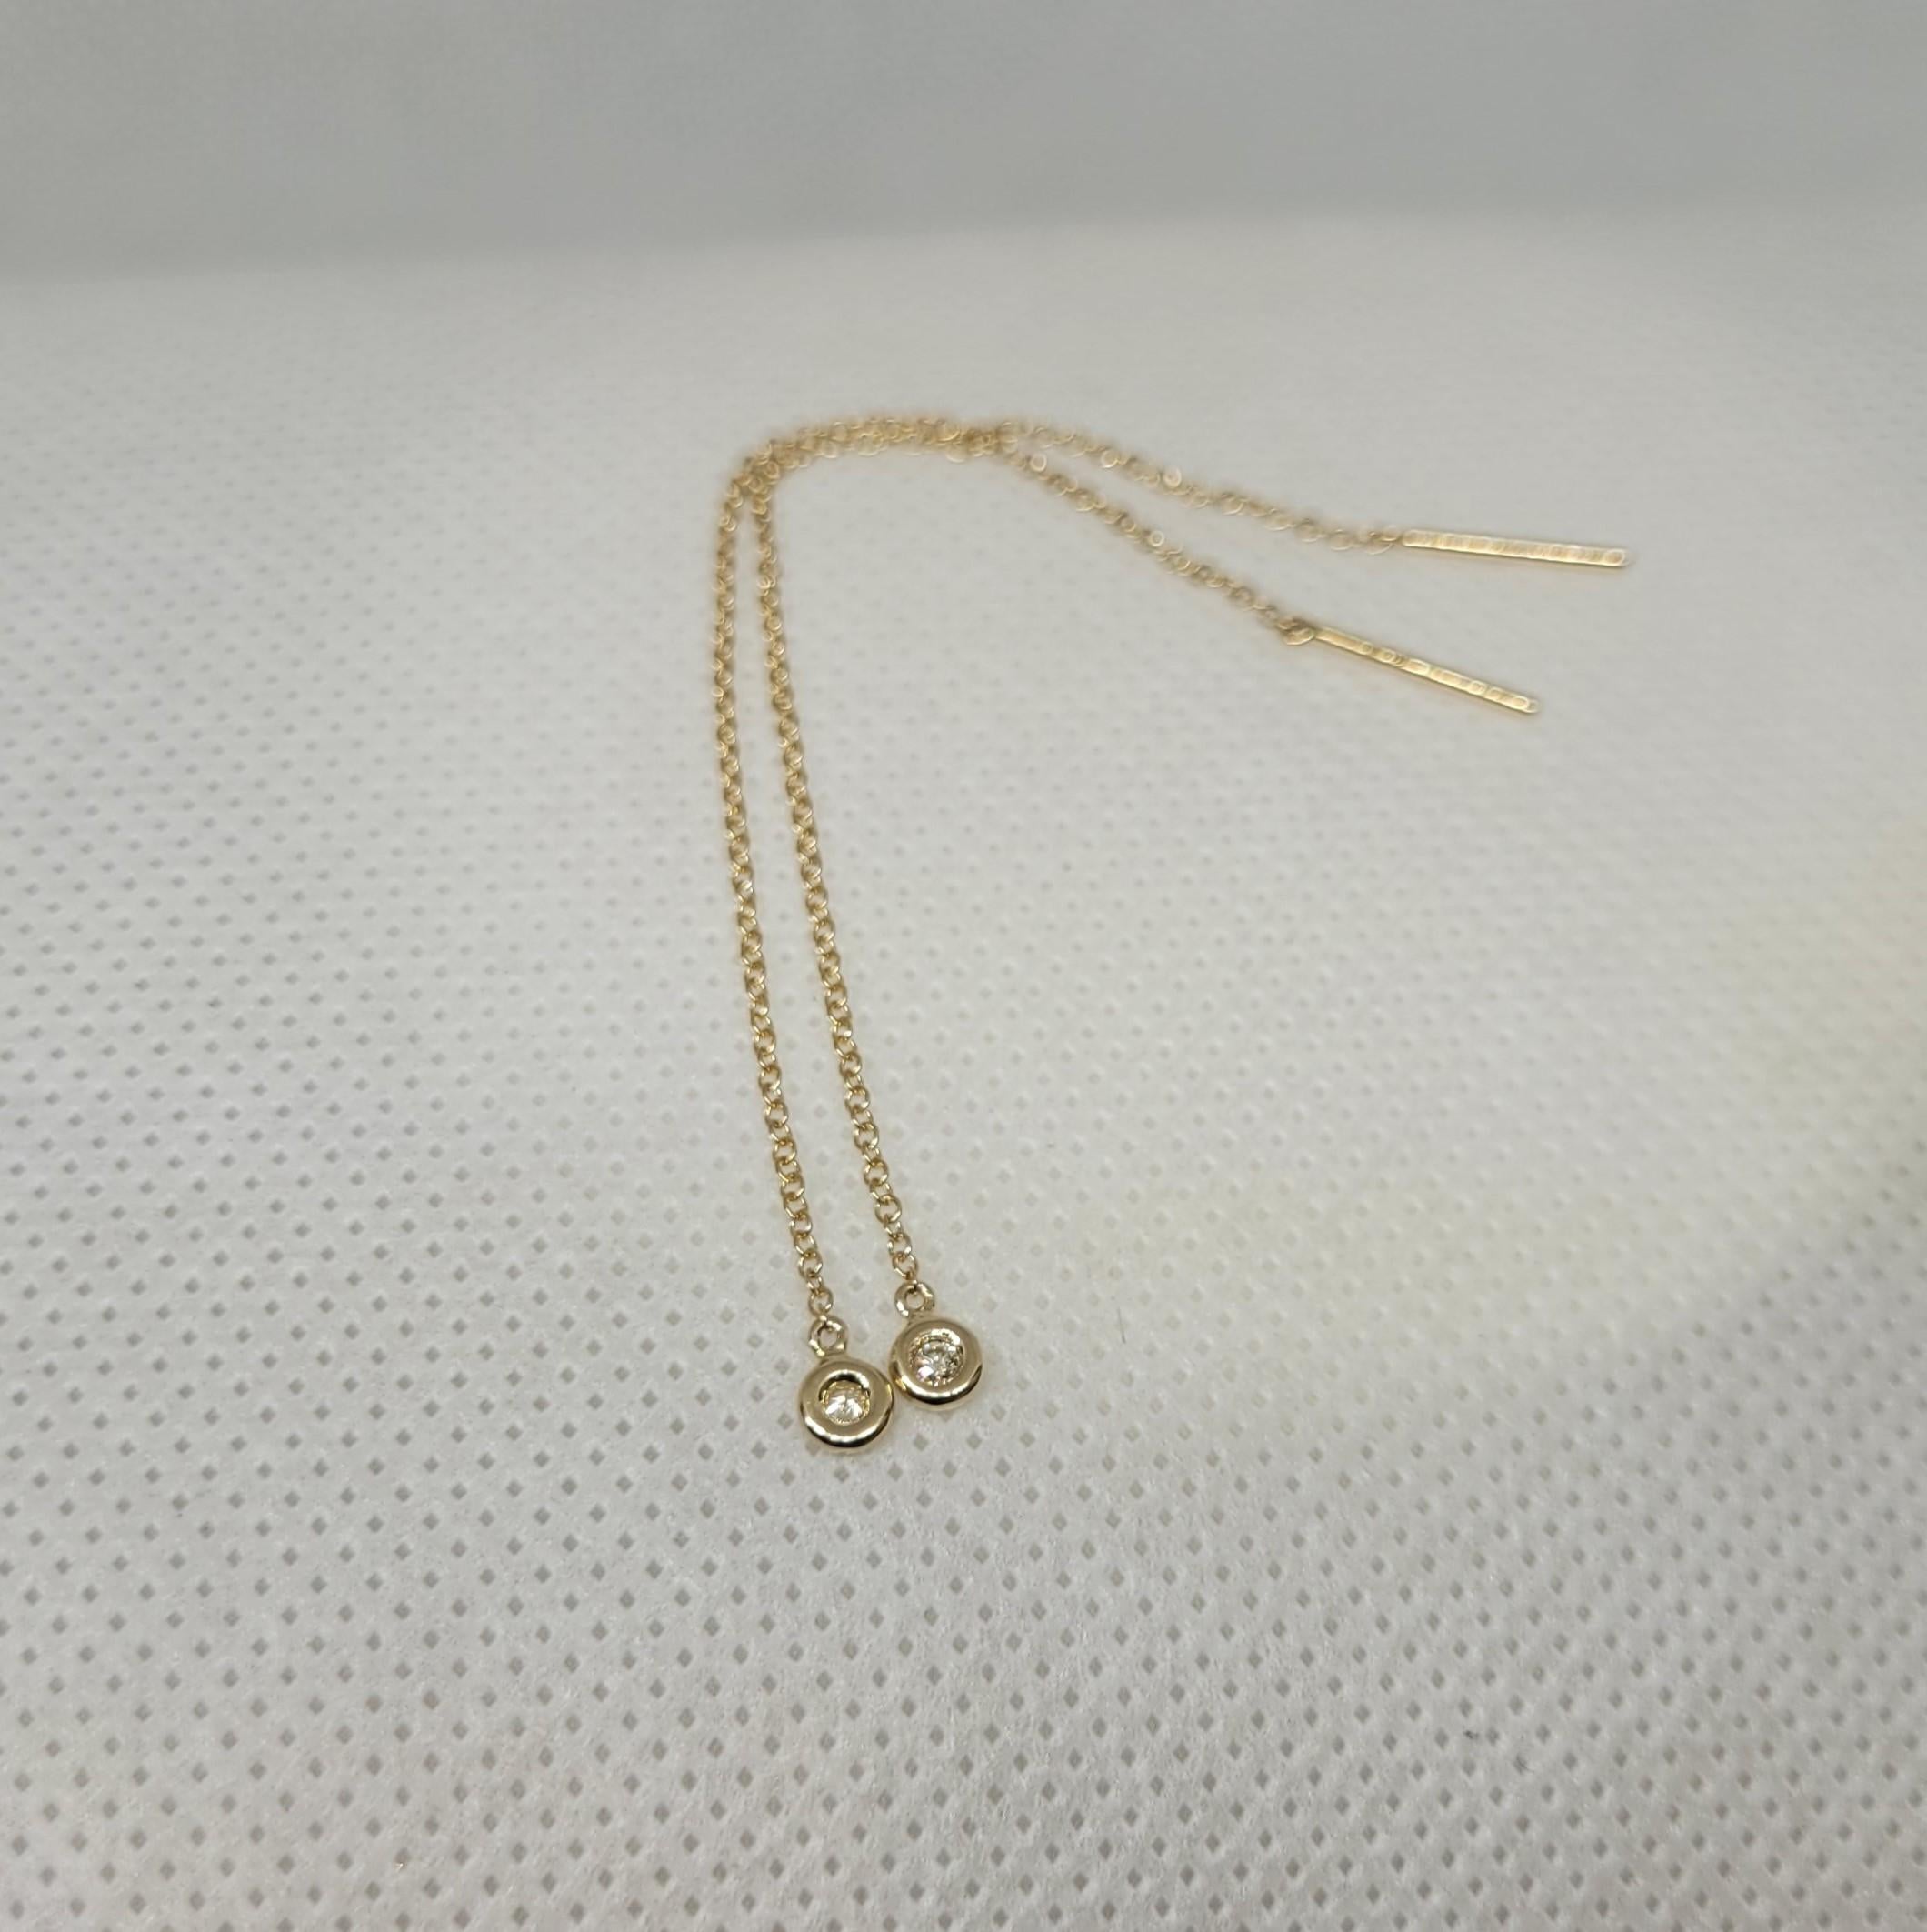 14kt Gold Thread Chain Earrings with Two Bezel Set Diamonds of Approx. .04cttw In Good Condition For Sale In Rancho Santa Fe, CA